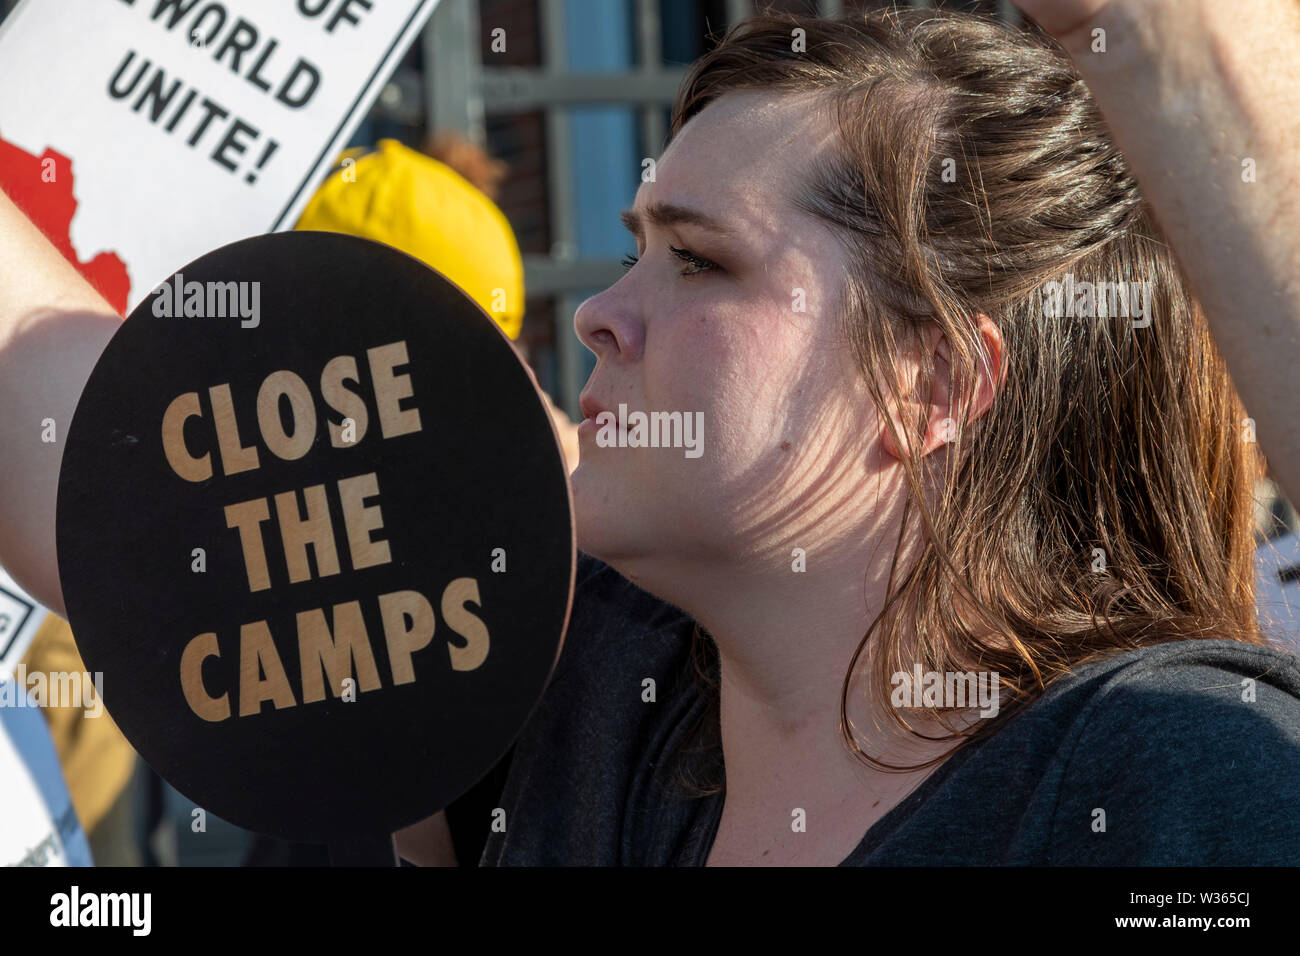 Detroit, Michigan USA - 12 July 2019 - People upset about the separation of immigrant families and the detention of refugees and small children rallie Stock Photo